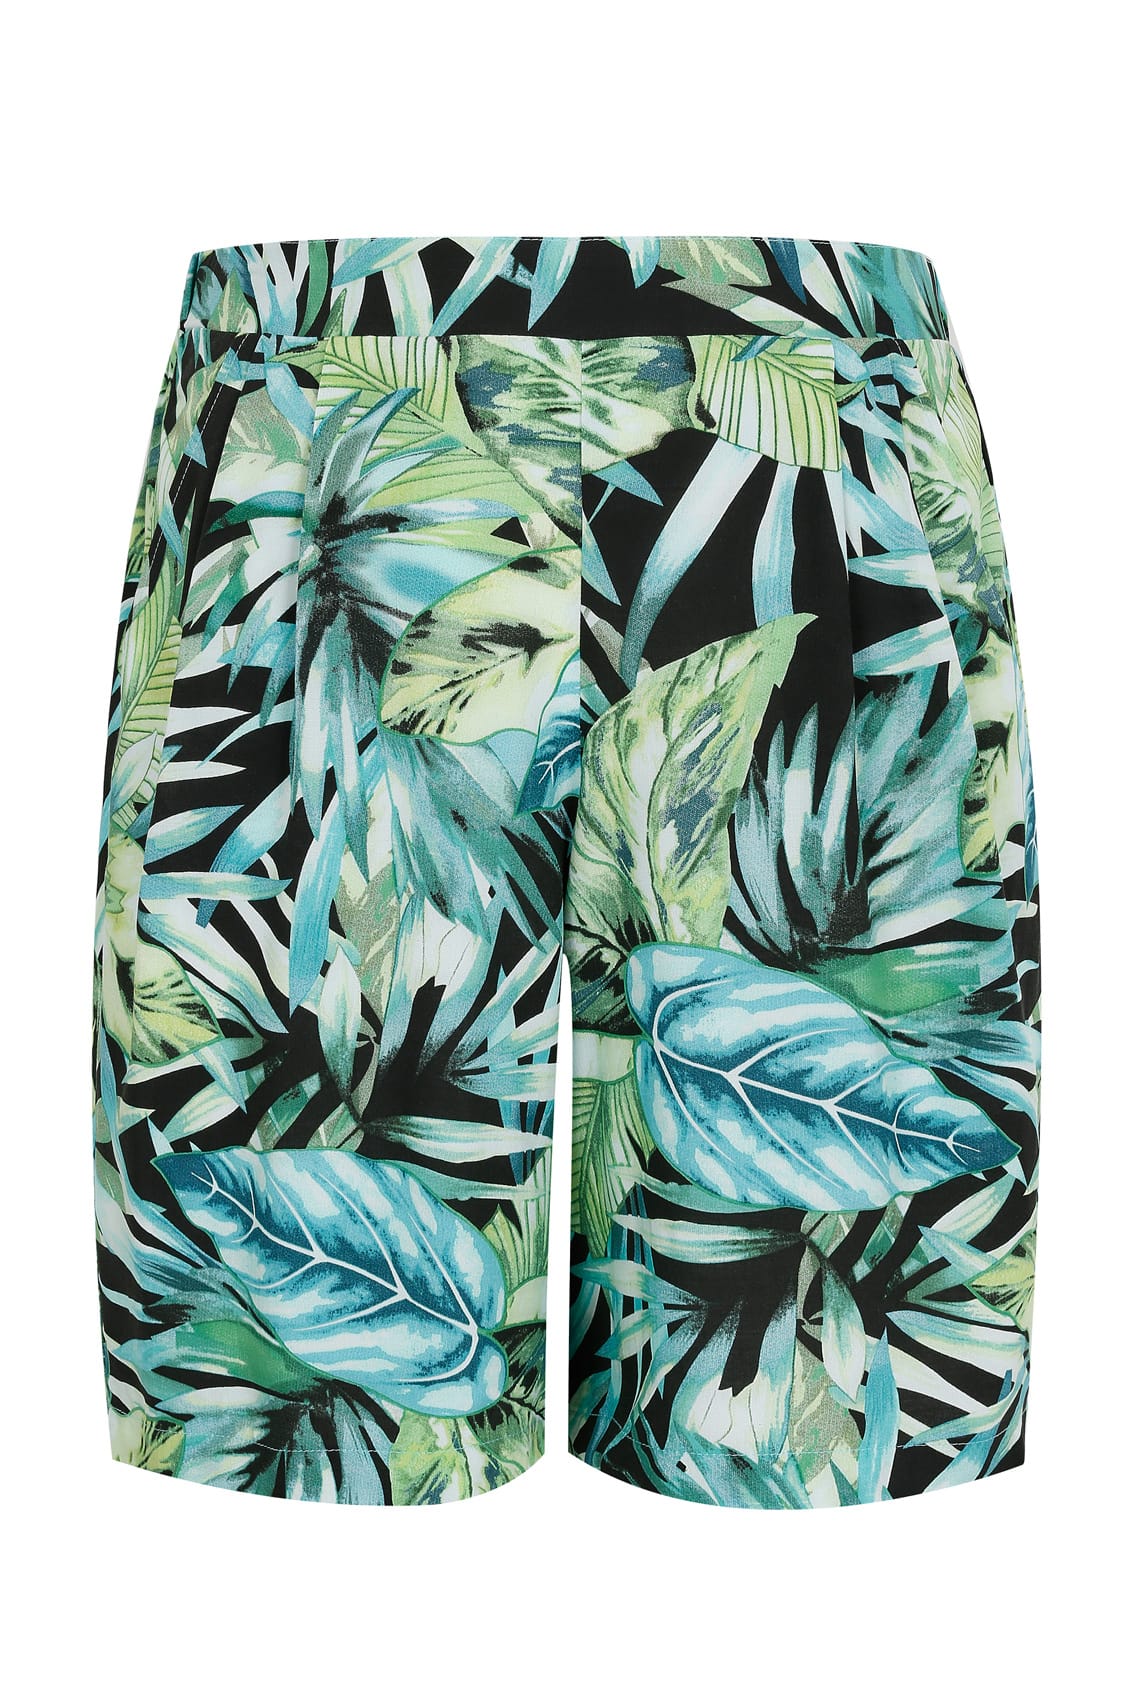 Green & Black Tropical Palm Print Flat Front Shorts With Pockets plus ...